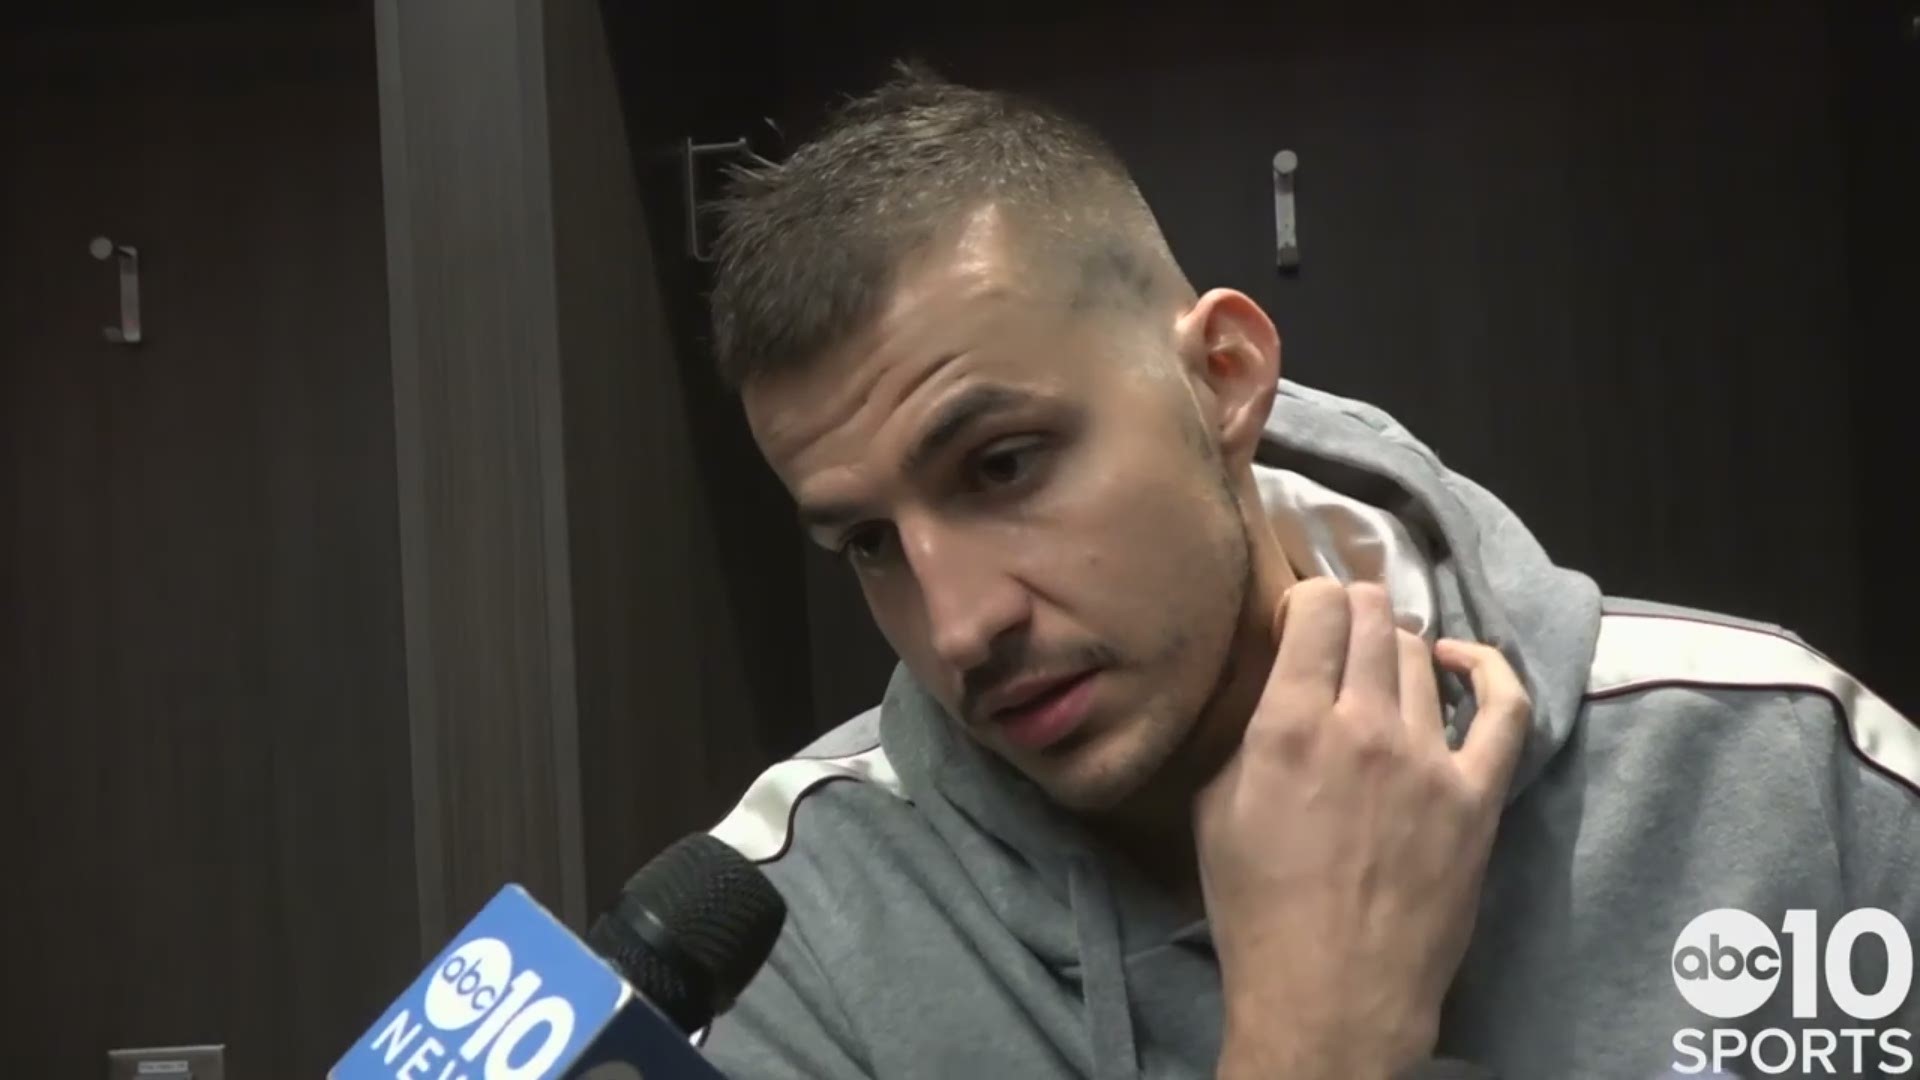 Nemanja Bjelica discusses his Kings overcoming the loss of two starters, the play from Bogdan Bogdanovic and his 19 point effort.